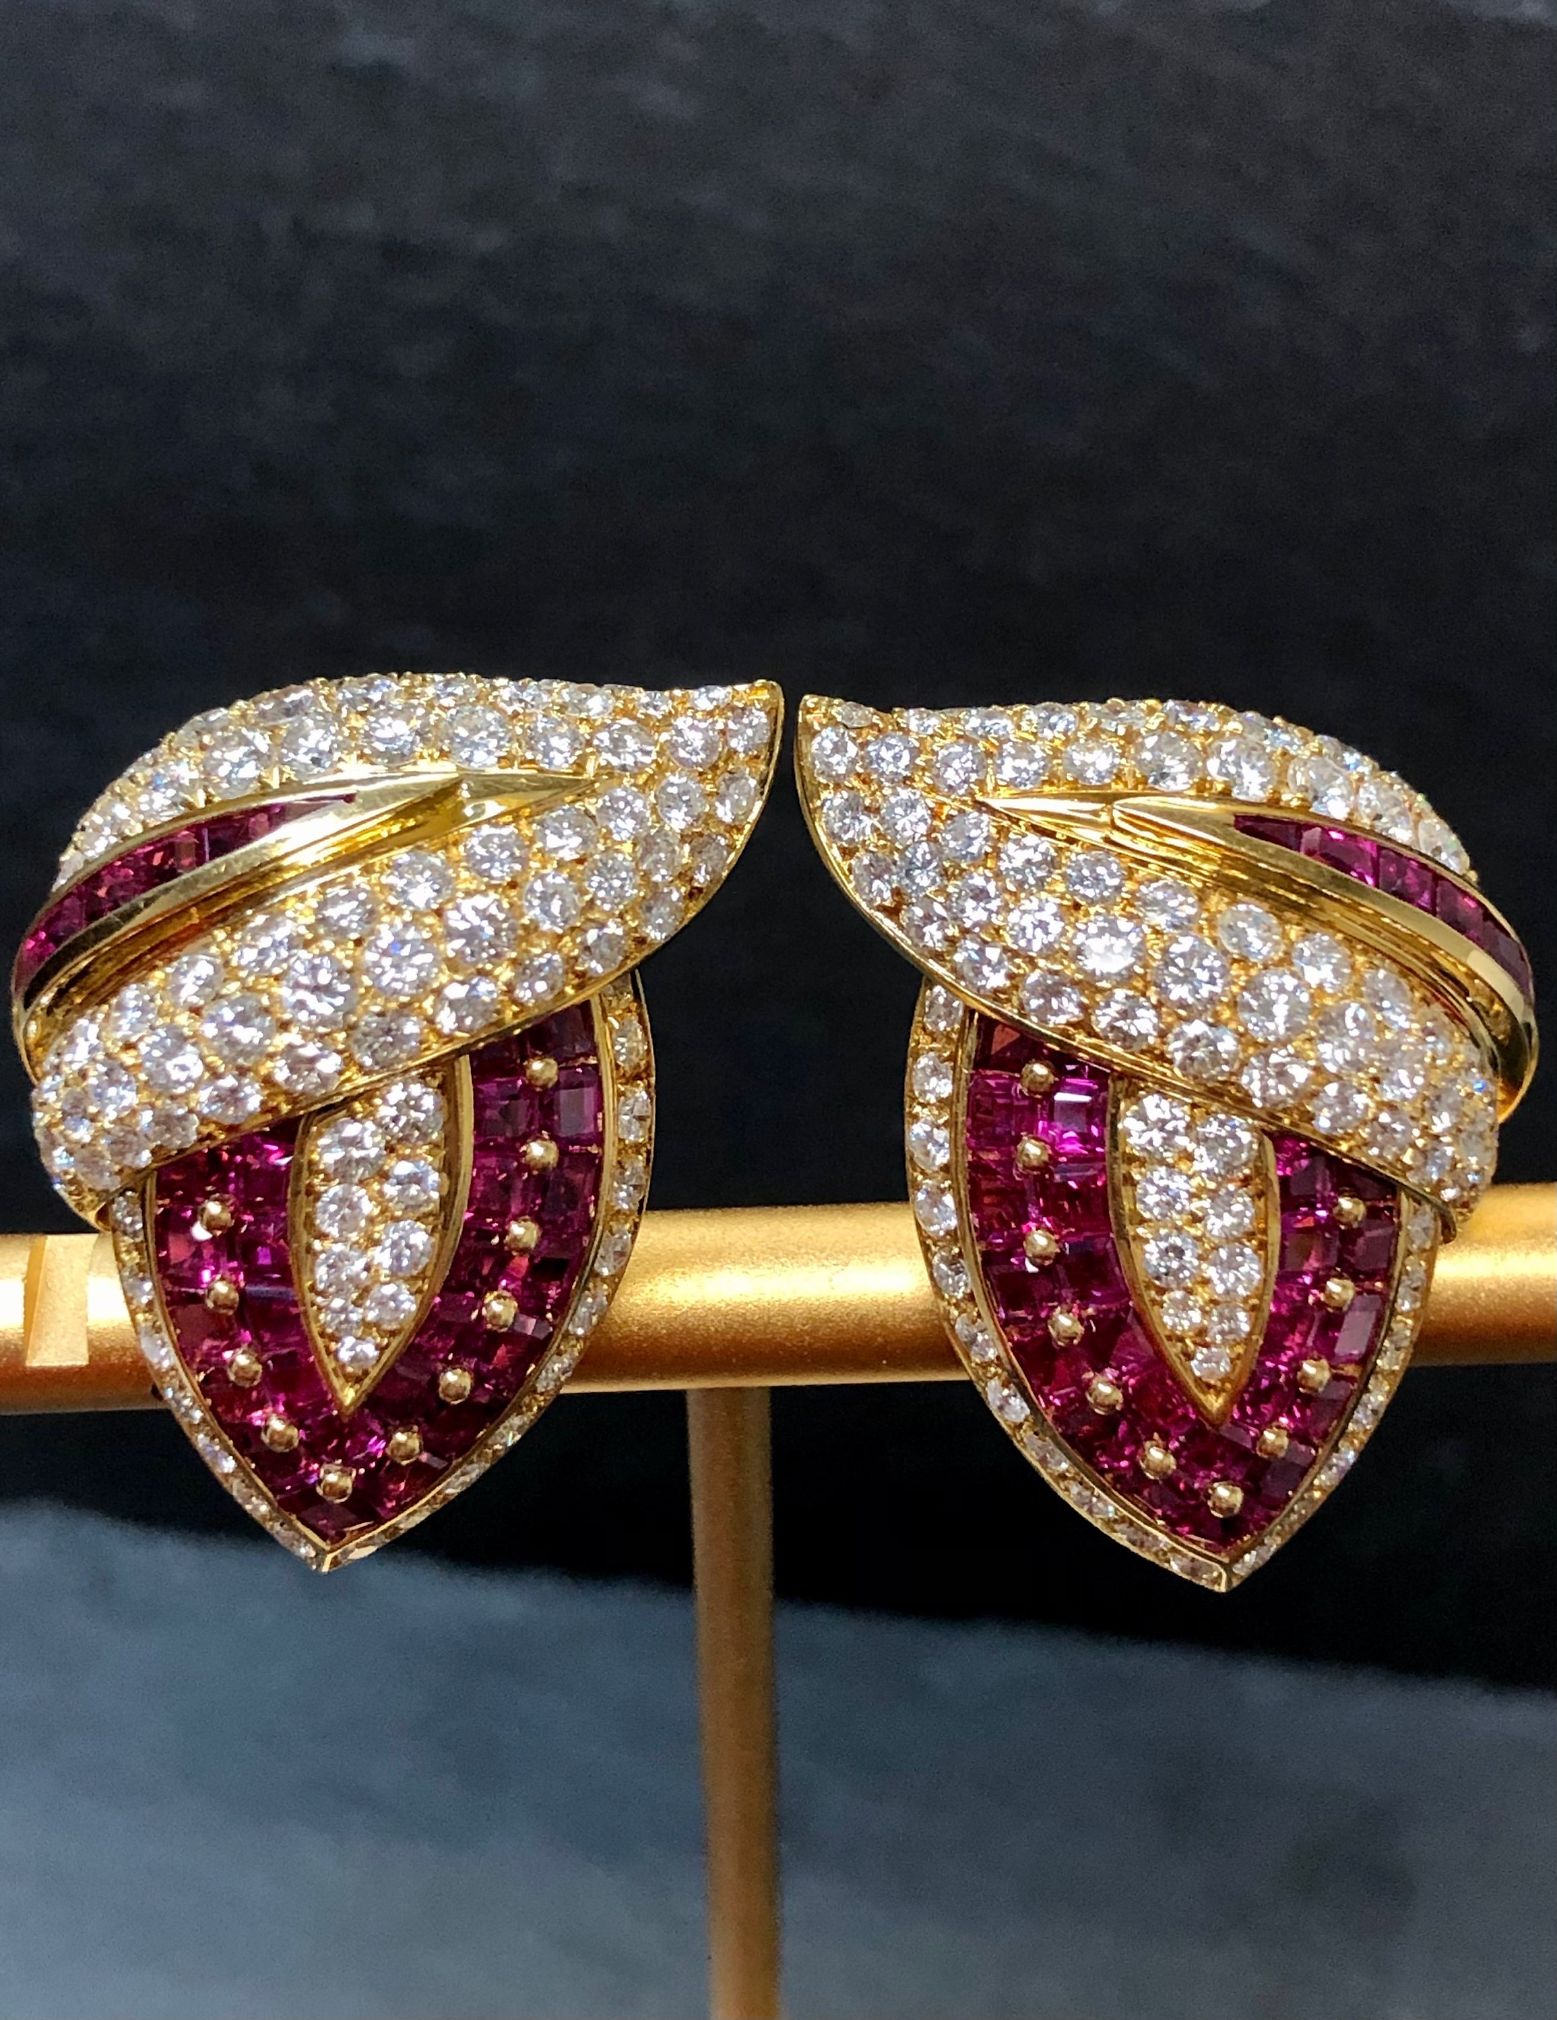 An absolutely gorgeous pair of very well made earrings done in 18K and set with approximately 6cttw in G-H color Vs1-2 clarity diamonds as well as approximately 6cttw in calibrated square cut natural rubies.

Dimensions/Weight
1.10” long by 1.10”